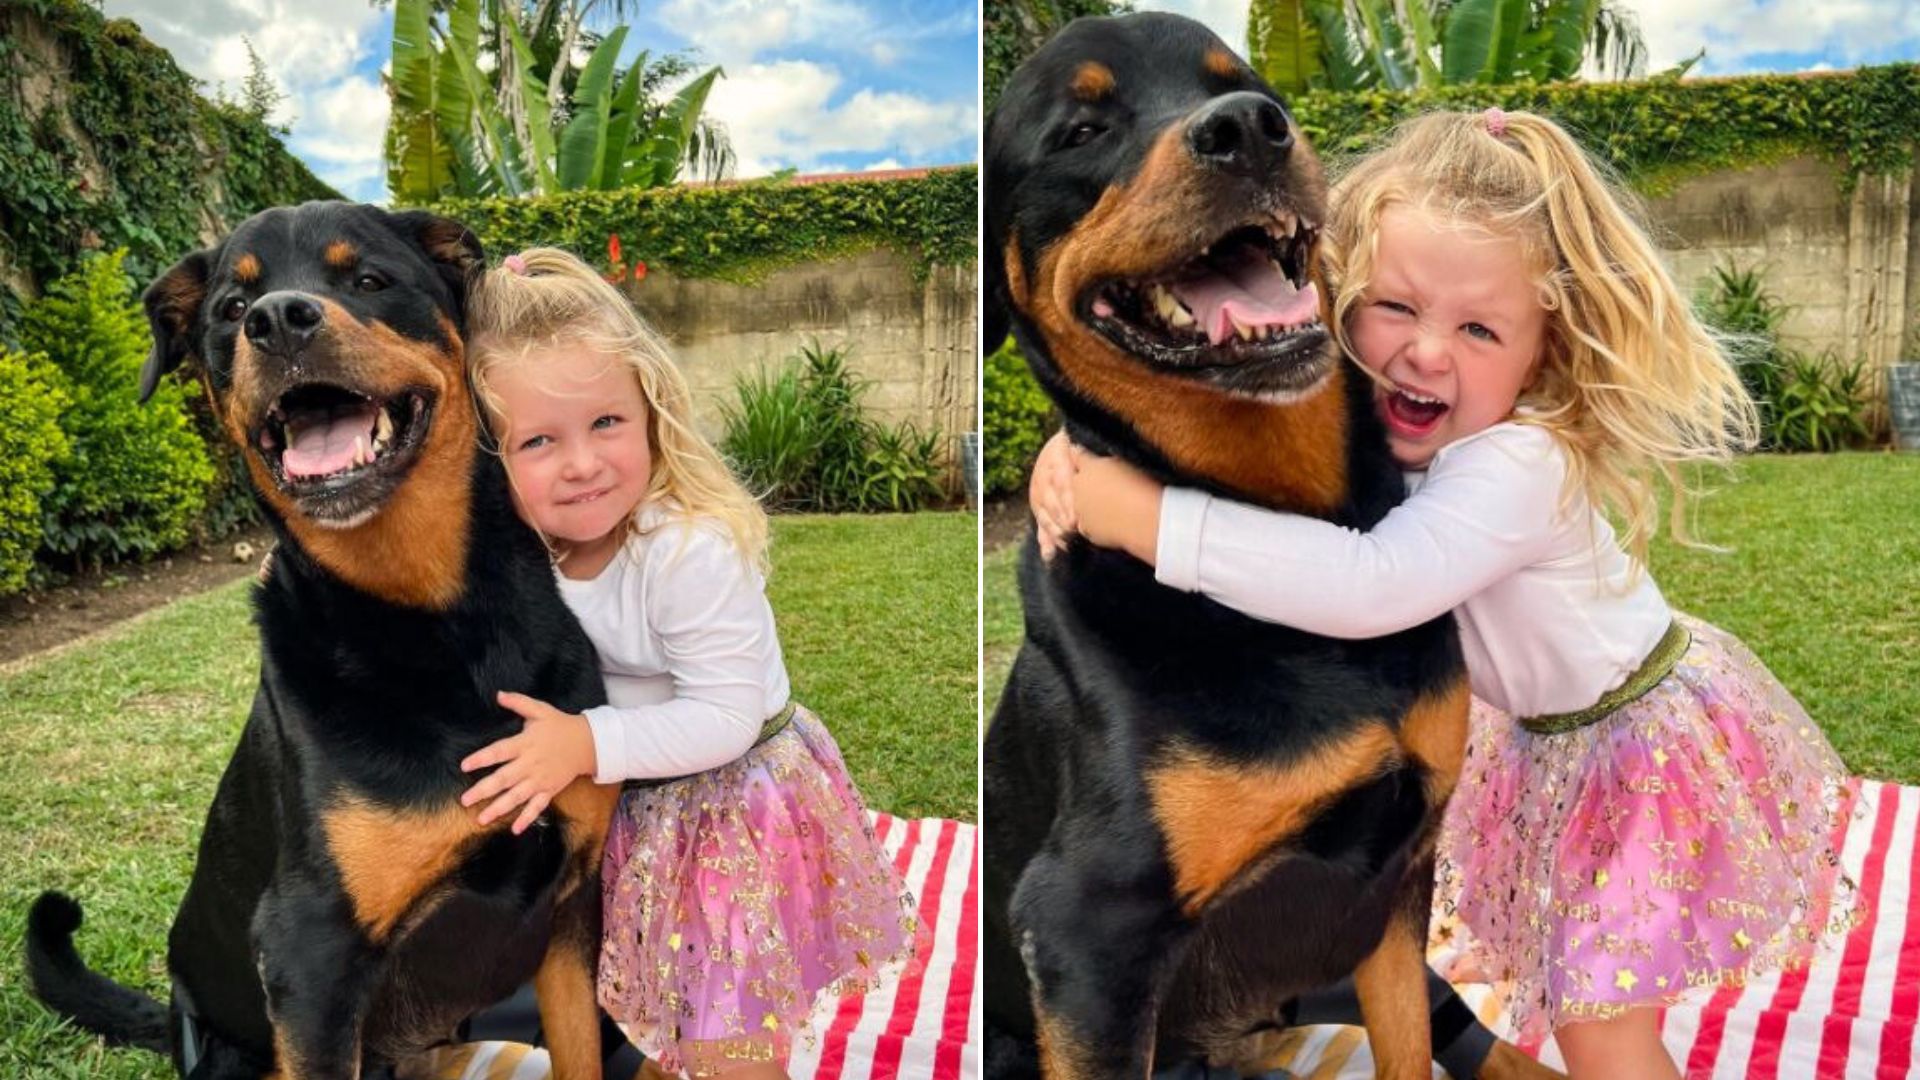 Adorable Rottweiler Puppy Helps Little Girl Overcome The Loss Of Her Old Dog